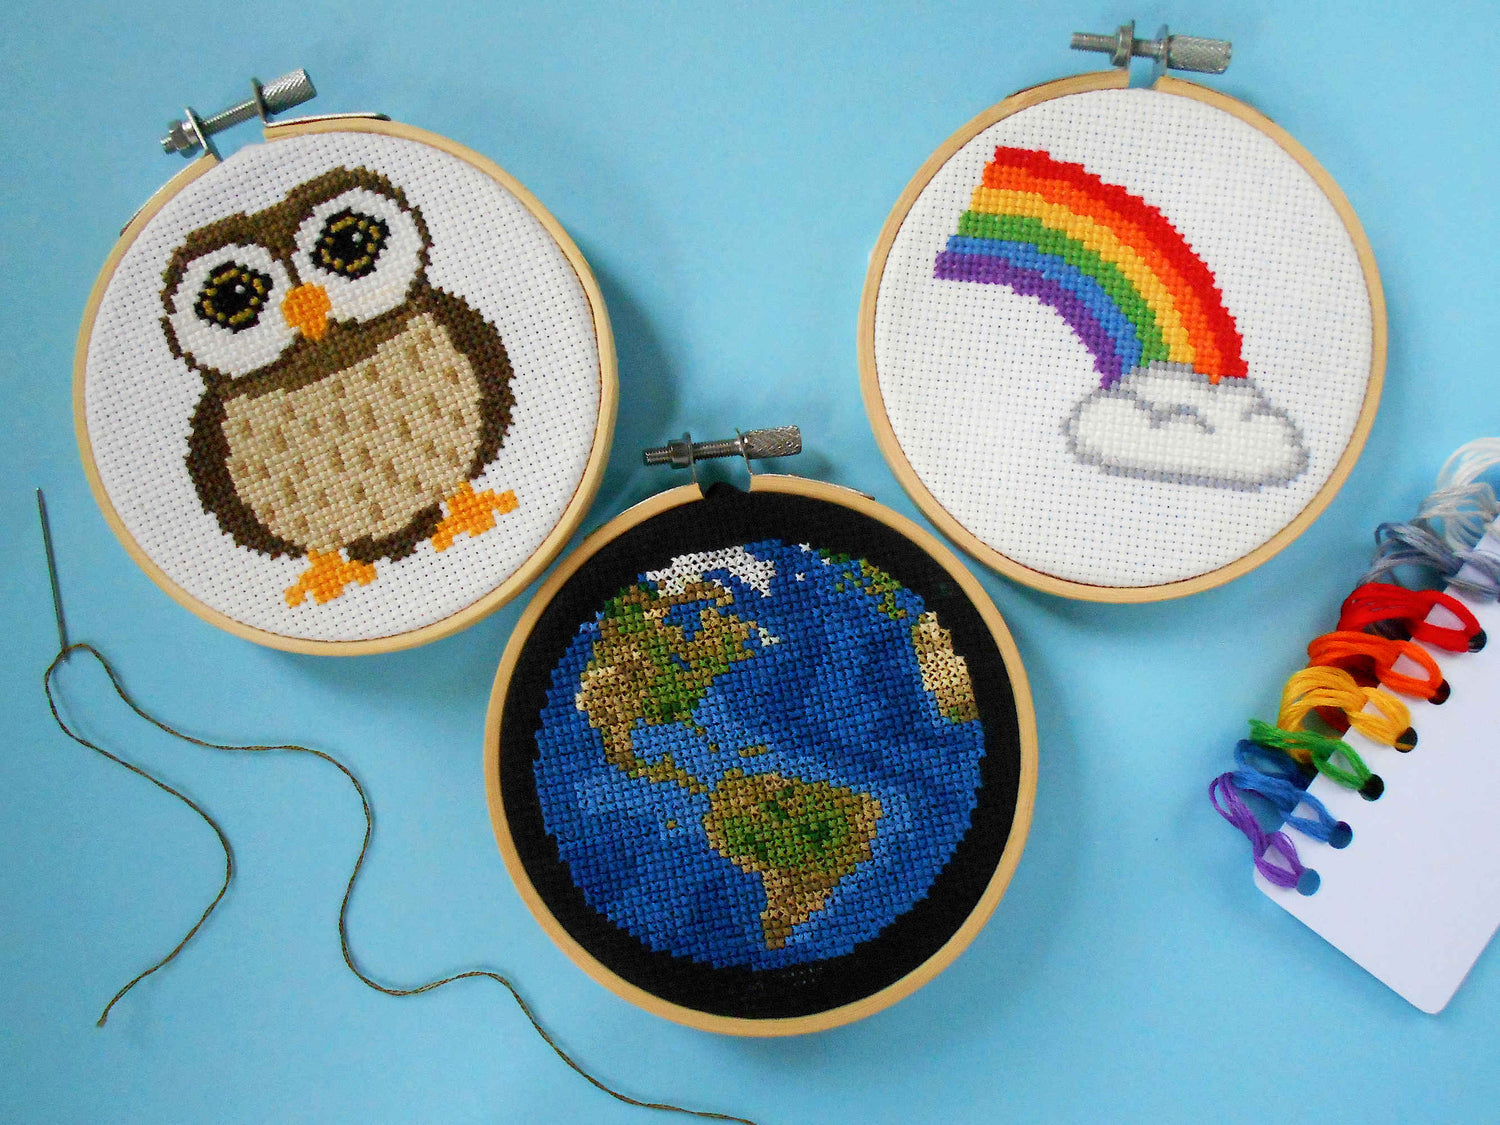 Owl, earth and rainbow cross stitch kits with threads